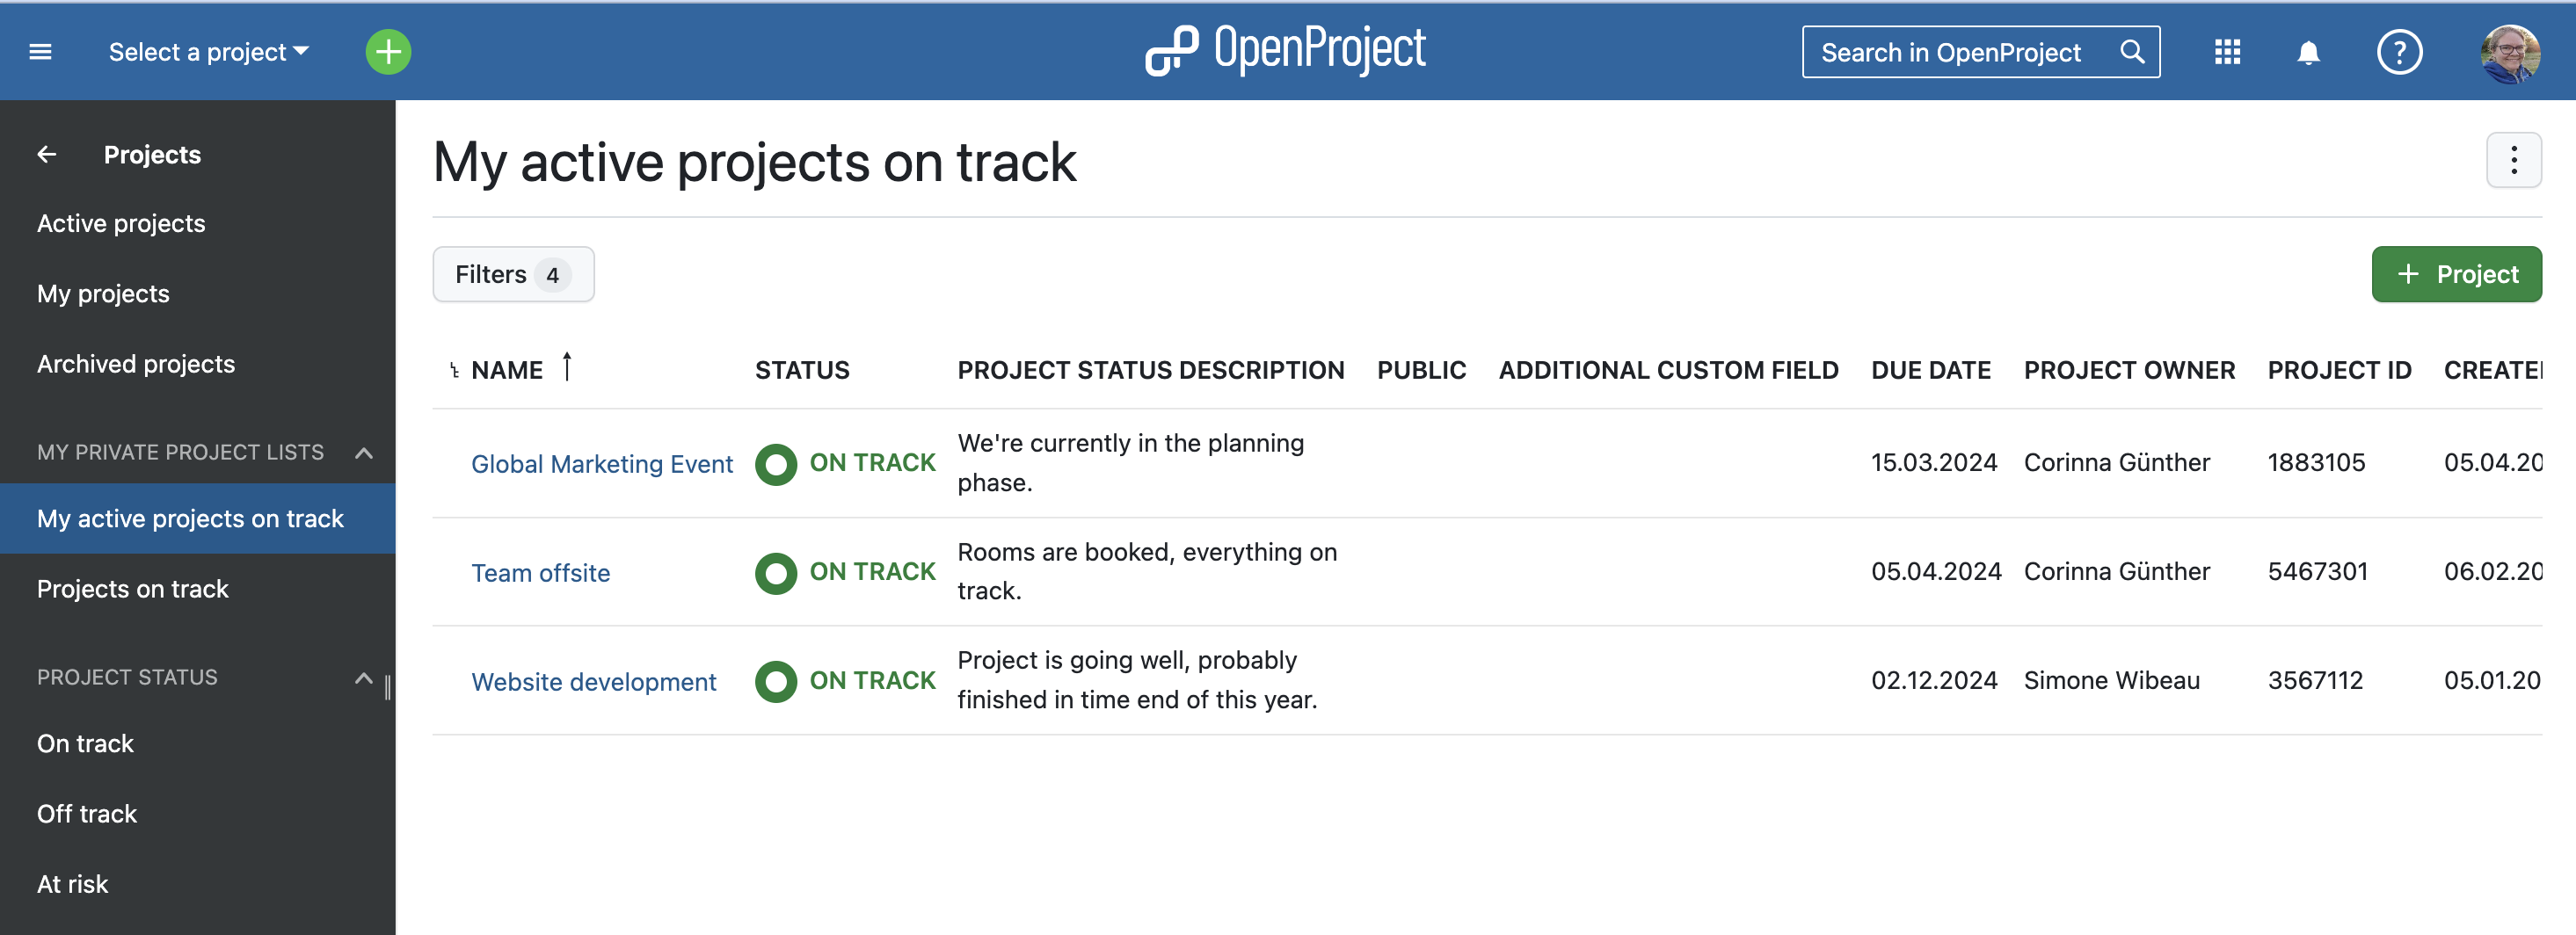 openproject-filter-project-lists.png